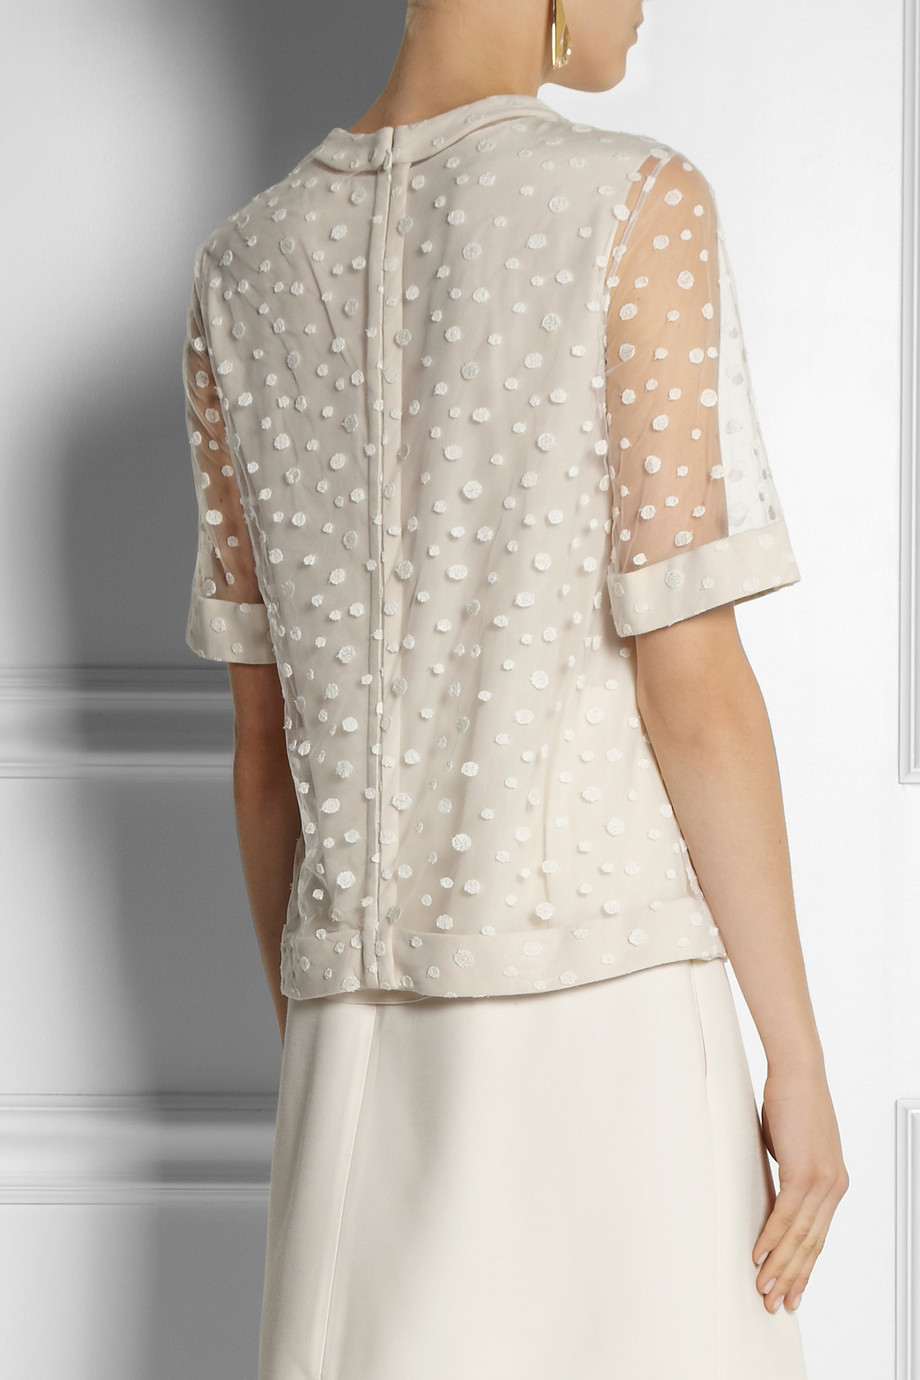 Lyst - Chloé Embroidered Polka-dot Tulle Top in White